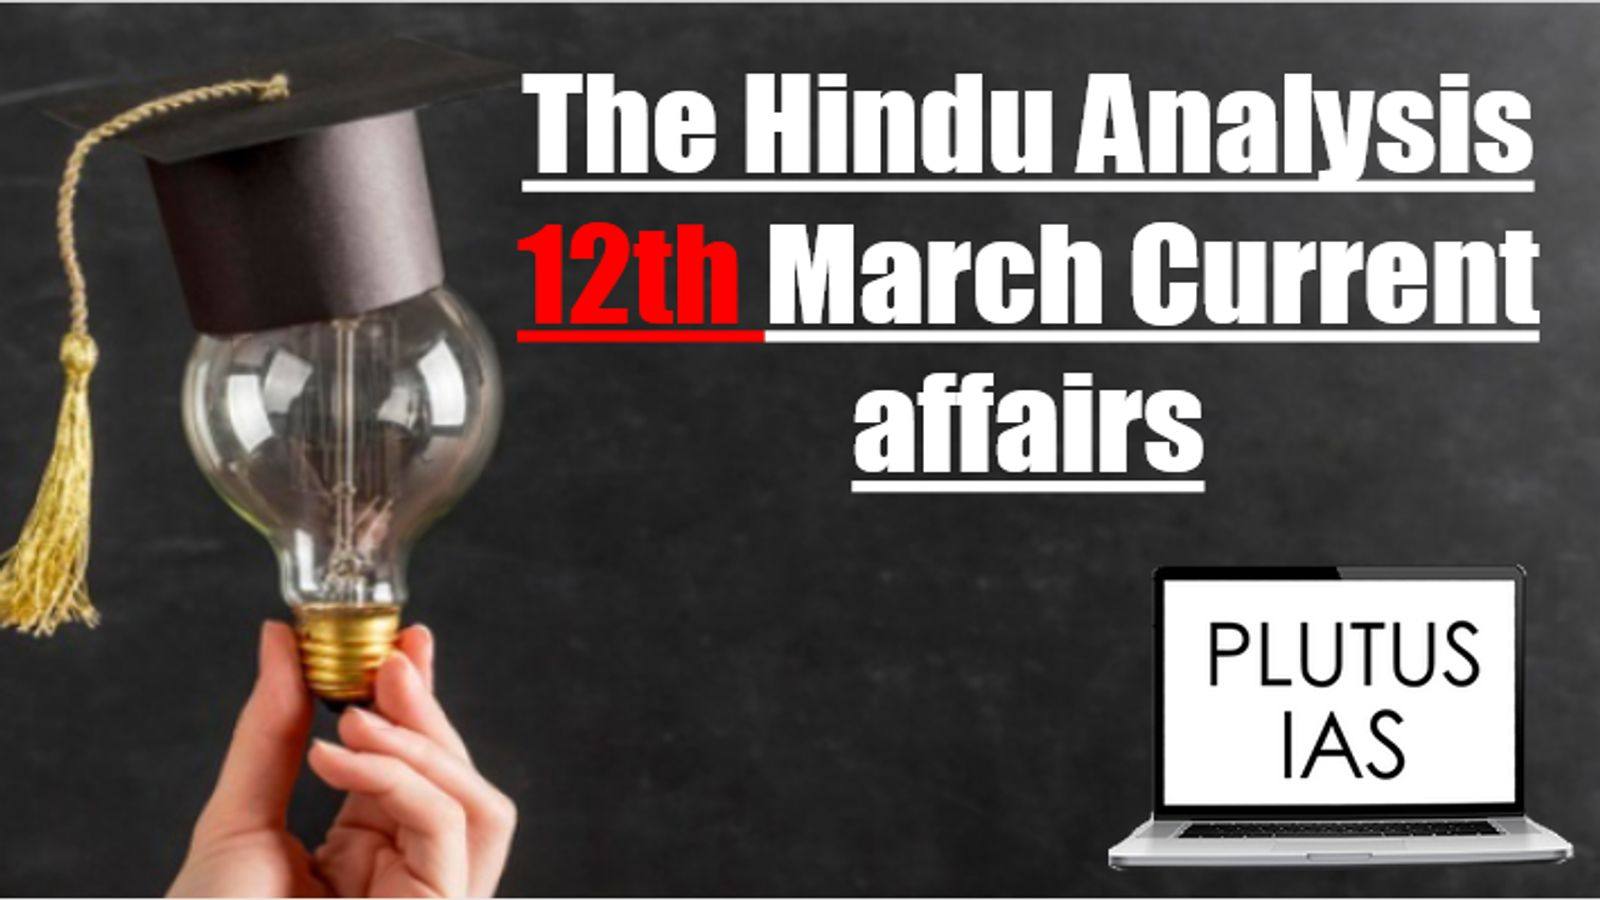 The Hindu Analysis 12th March Current Affairs